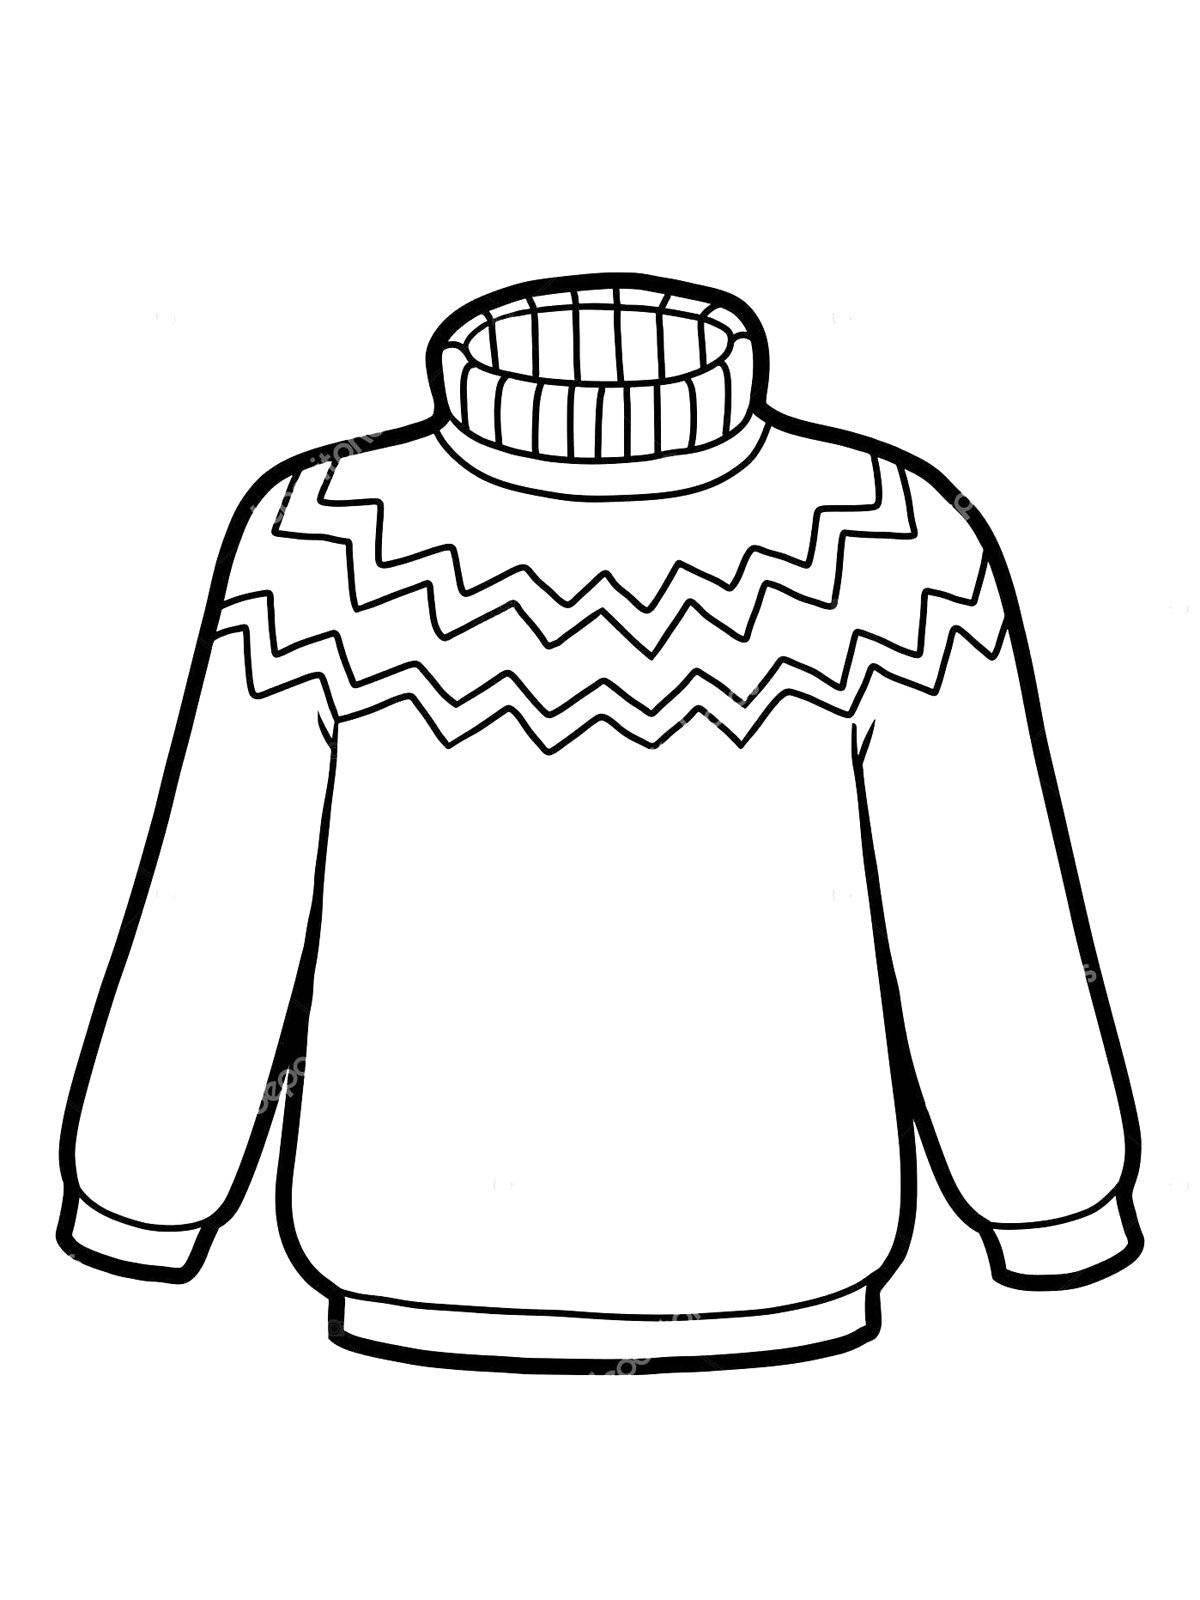 Colorful preschool sweater coloring page